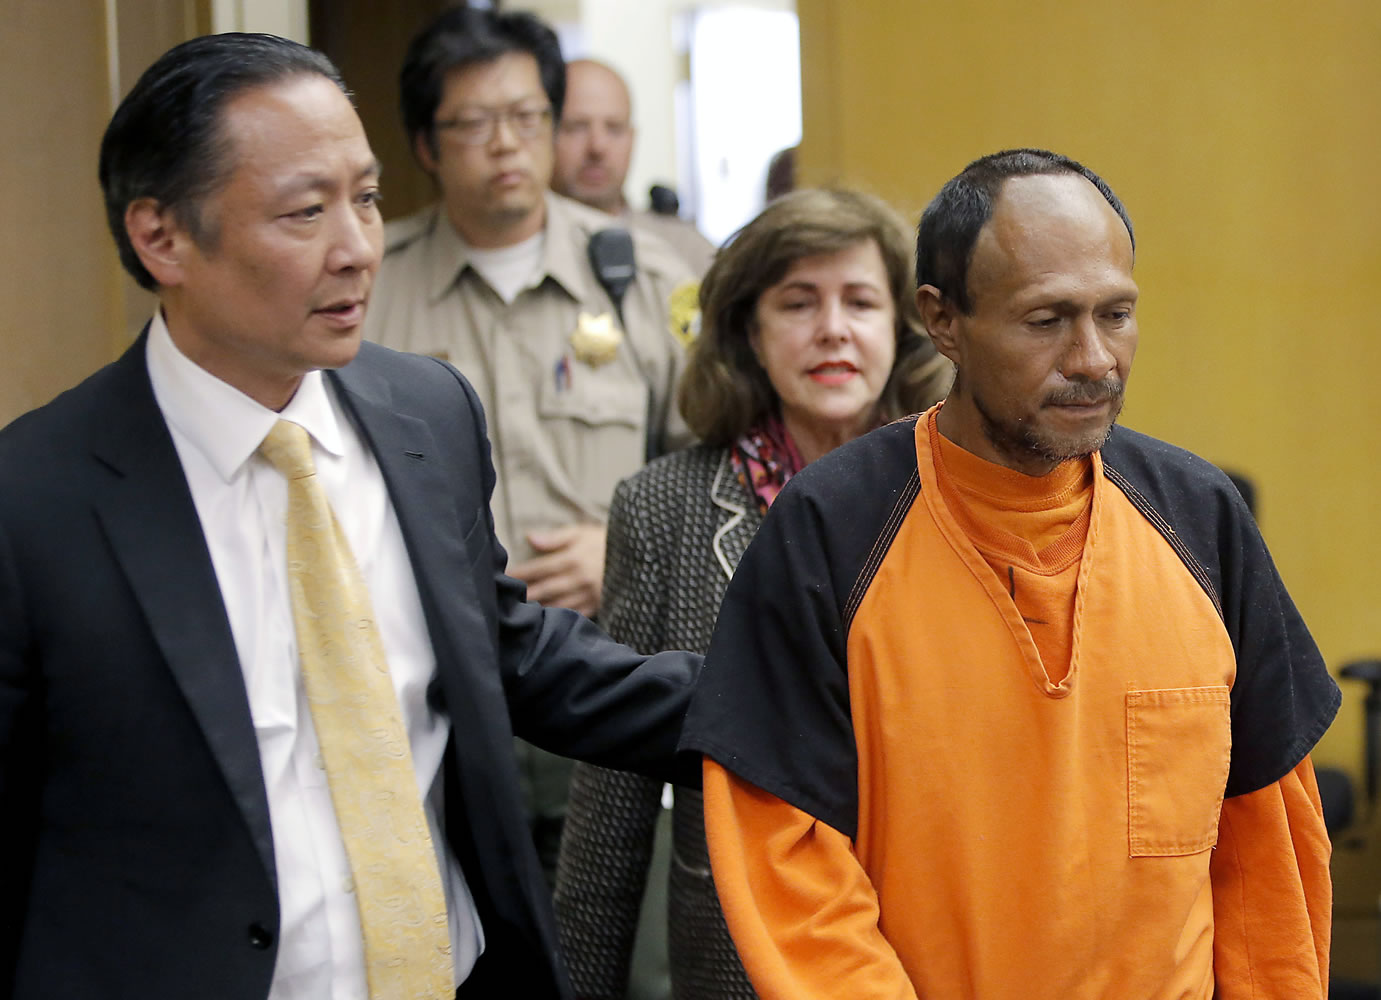 Juan Francisco Lopez-Sanchez, right, is lead into the courtroom July 7 by San Francisco Public Defender Jeff Adachi, left, and Assistant District Attorney Diana Garciaor, center, for his arraignment at the Hall of Justice in San Francisco. The parents of Kathryn Steinle filed a wrongful death claim Tuesday, Sept. 1, 2015 alleging that the San Francisco Sheriff's Department is to blame for releasing an illegal immigrant from jail despite a federal &quot;detainer&quot; request to keep in custody for possible deportation proceedings. A claim is usually a precursor to a lawsuit.